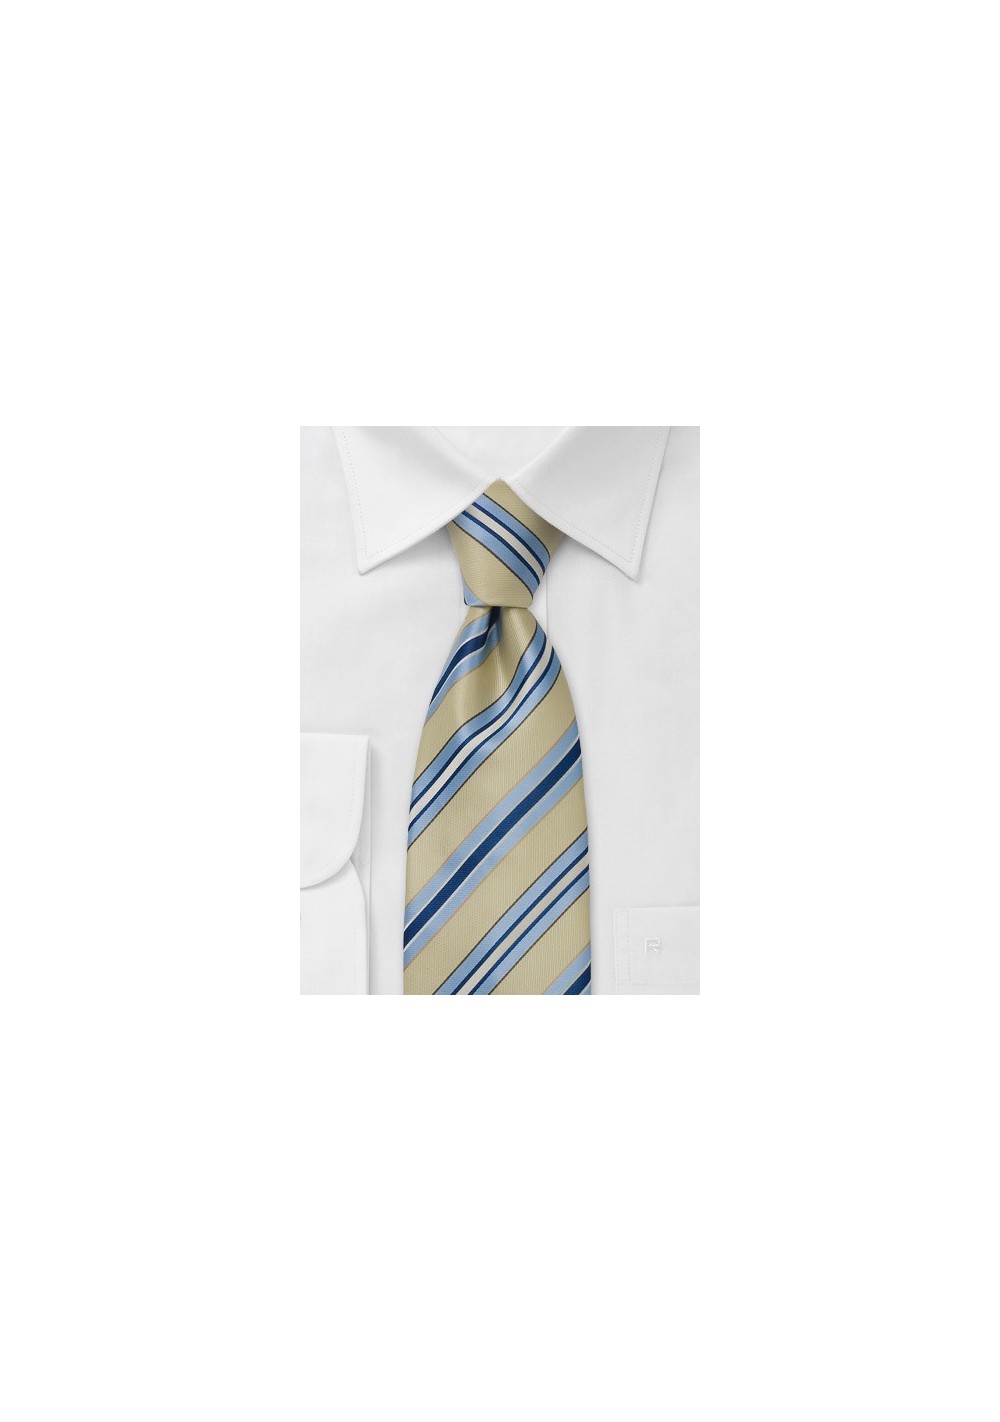 Yellow tie with blue stripes - Modern necktie made from Microfiber